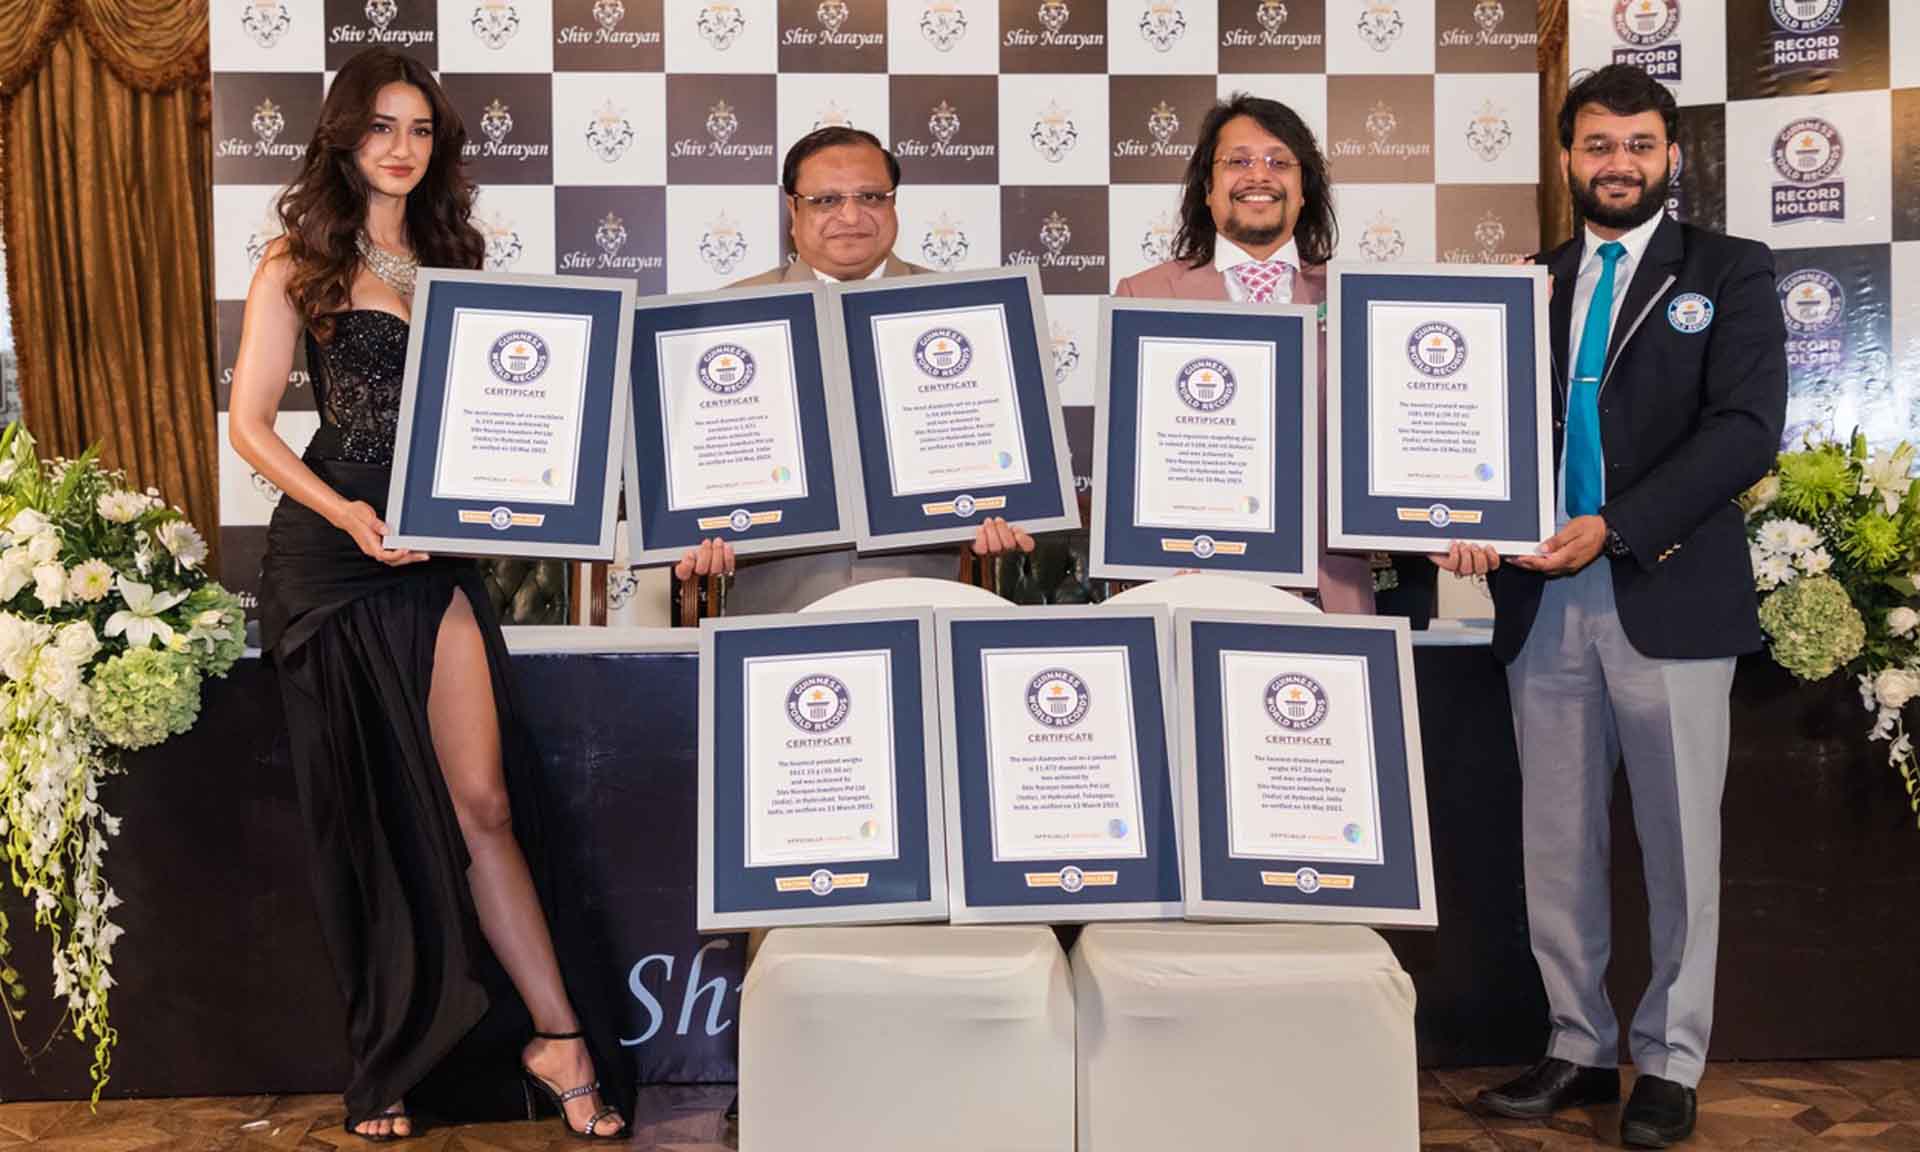 Shiv Narayan Jewellers Makes History Achieving 8 Guinness World Records™ Titles